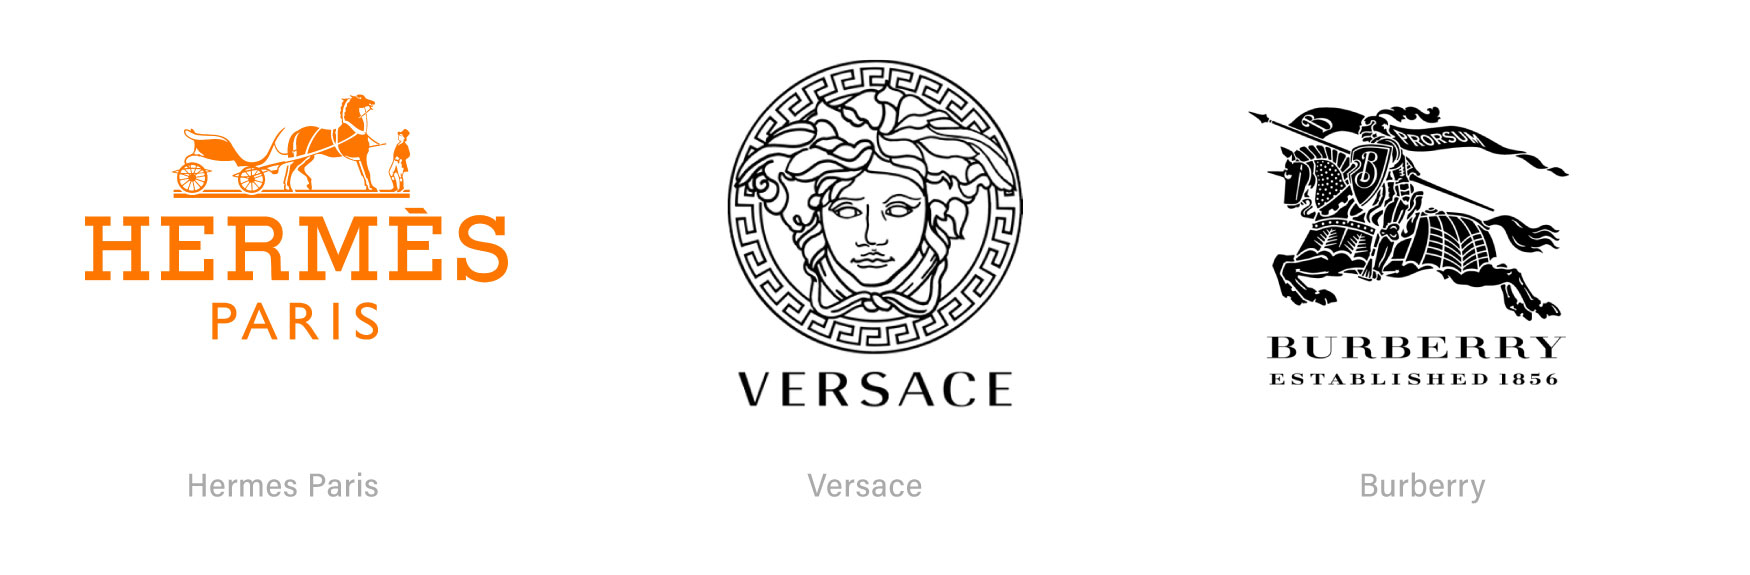 Luxury Logo Designs with Ornate Detail